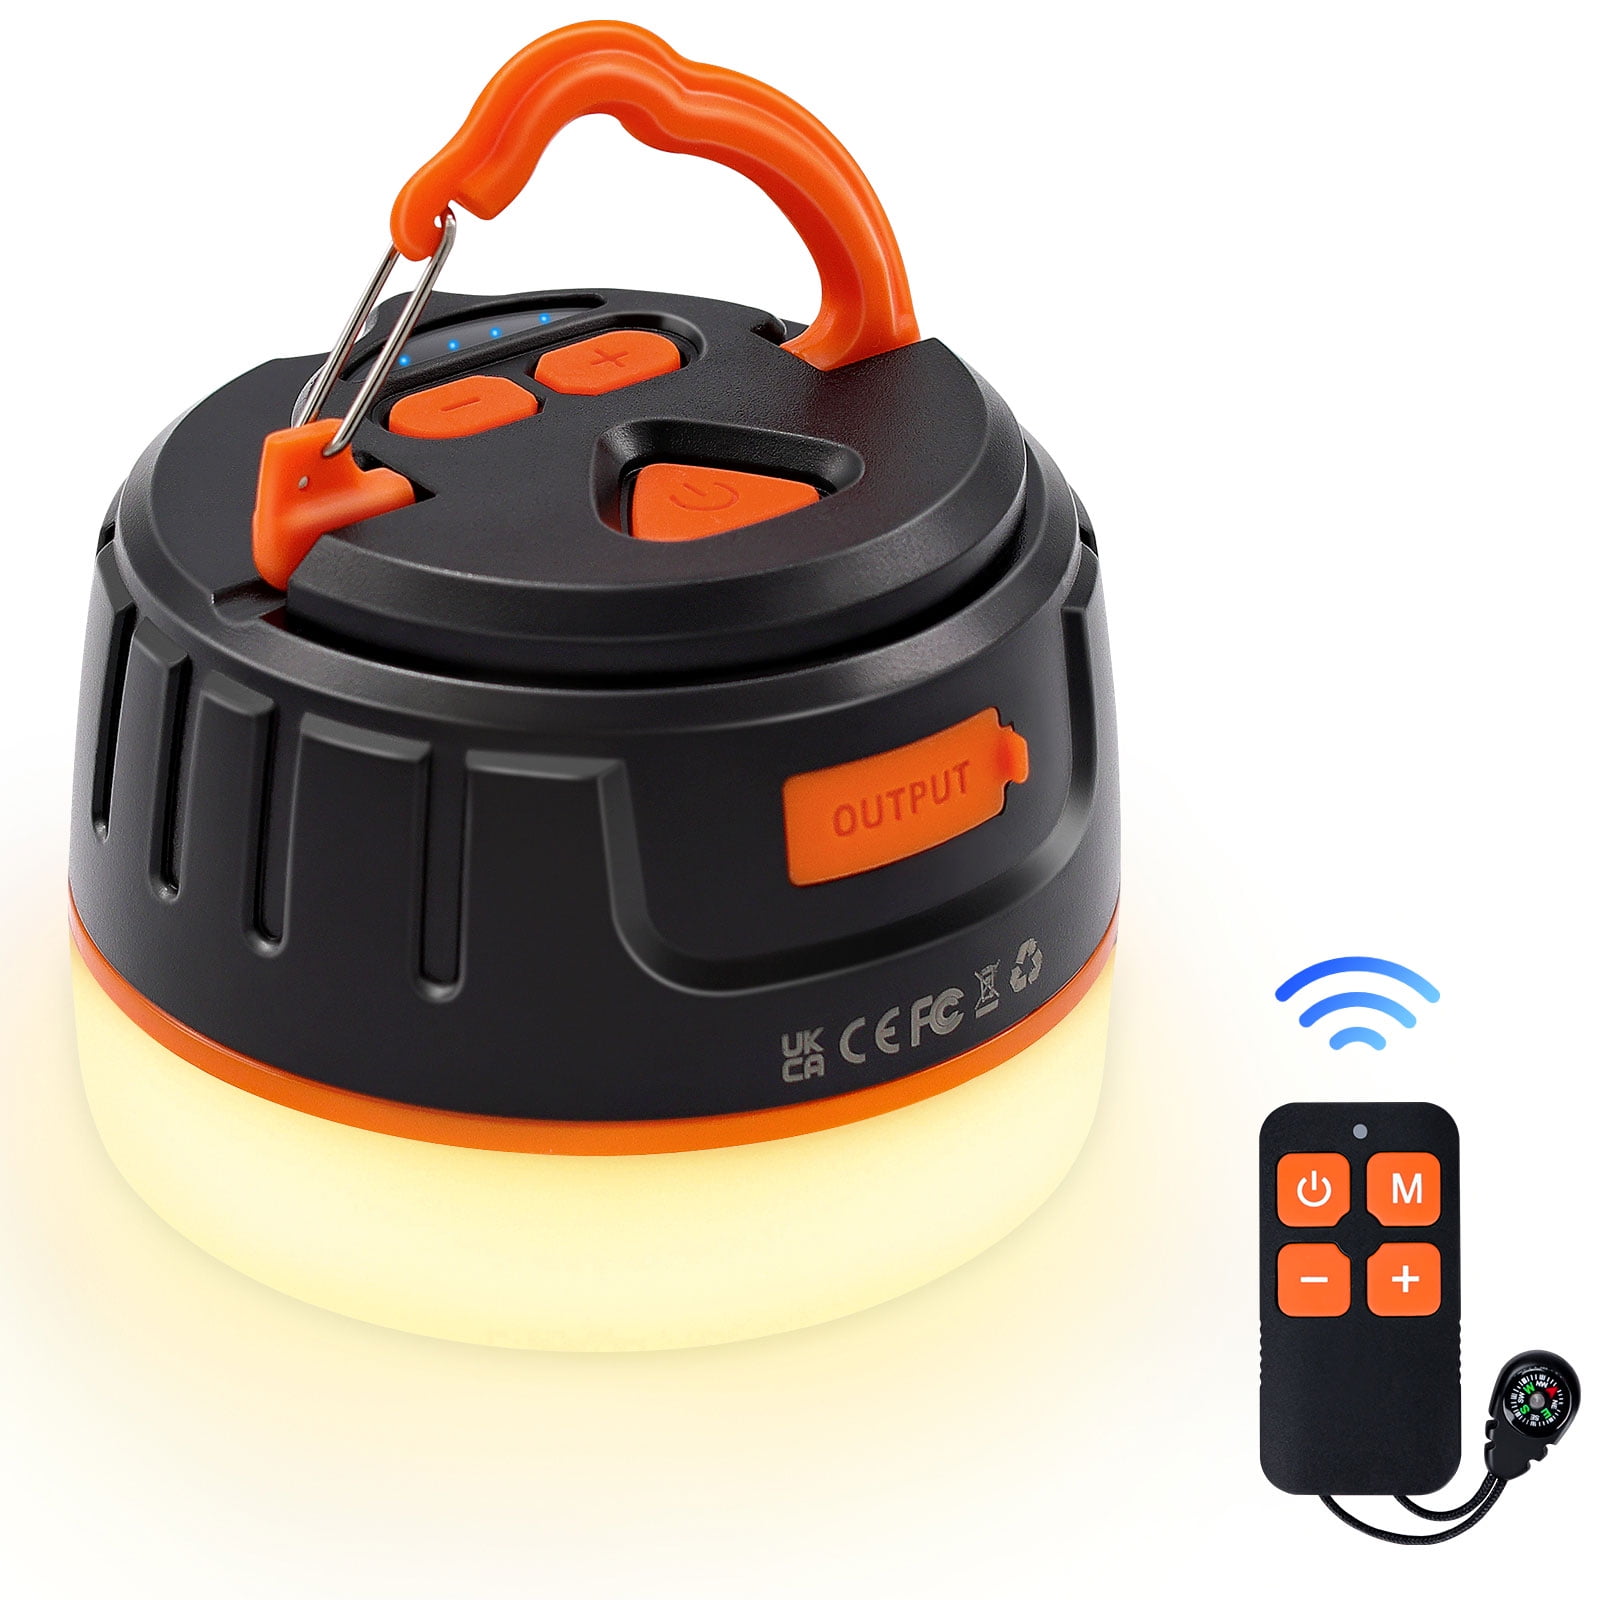 Camping Lantern Rechargeable - Led Camping Lanterns - Emergency Lights For  Home Power Failure, Portable Led Lamp With Adjustable Brightness